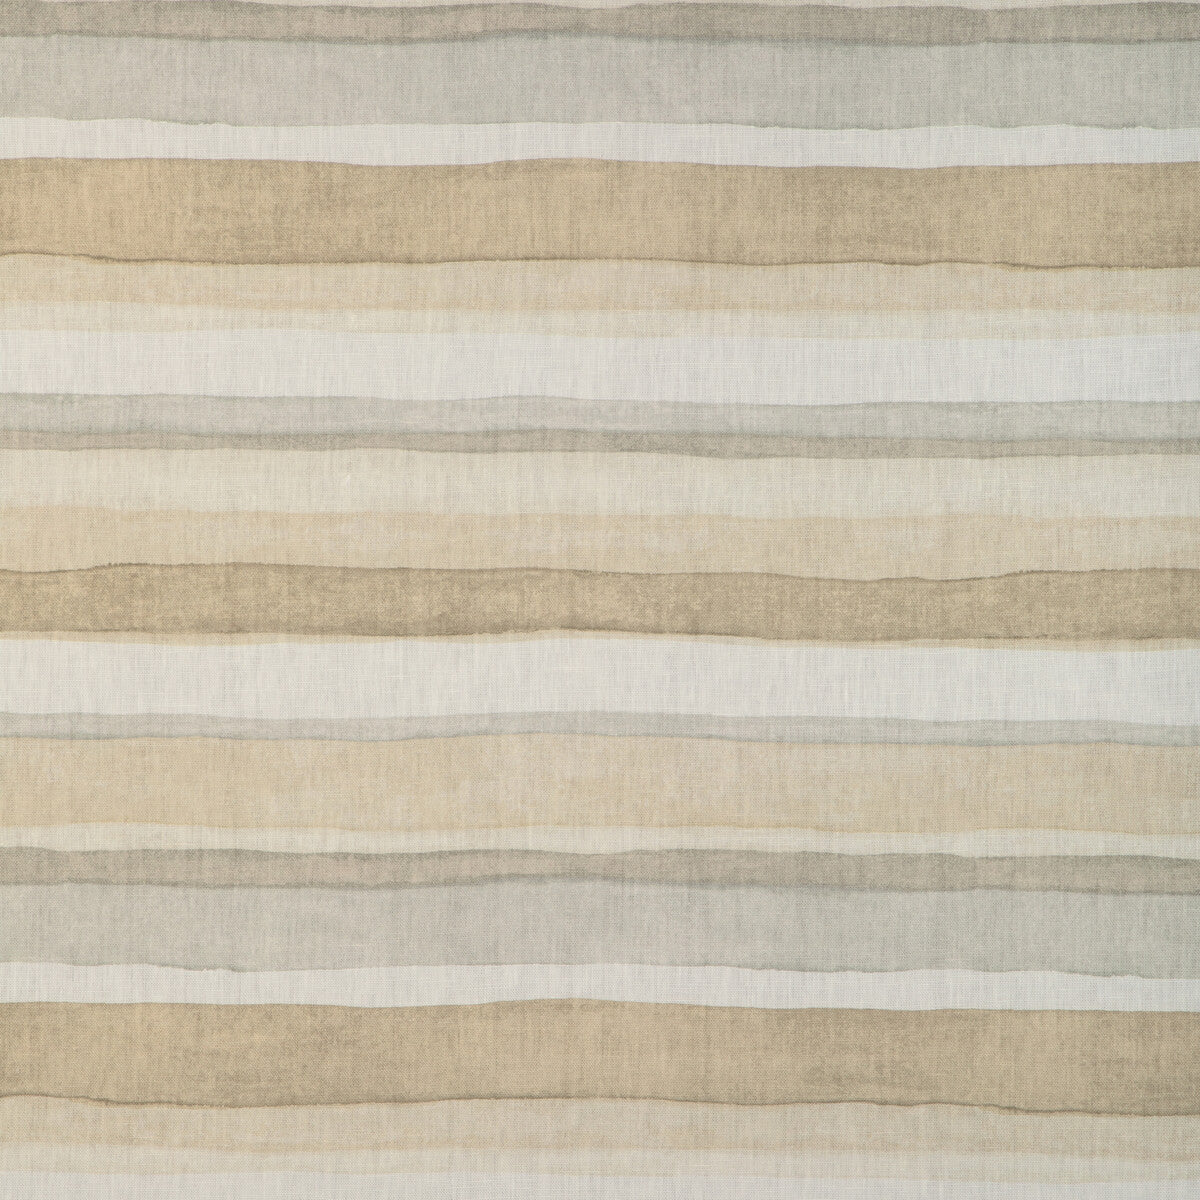 Malabo fabric in linen color - pattern MALABO.16.0 - by Kravet Basics in the Mid-Century Modern collection